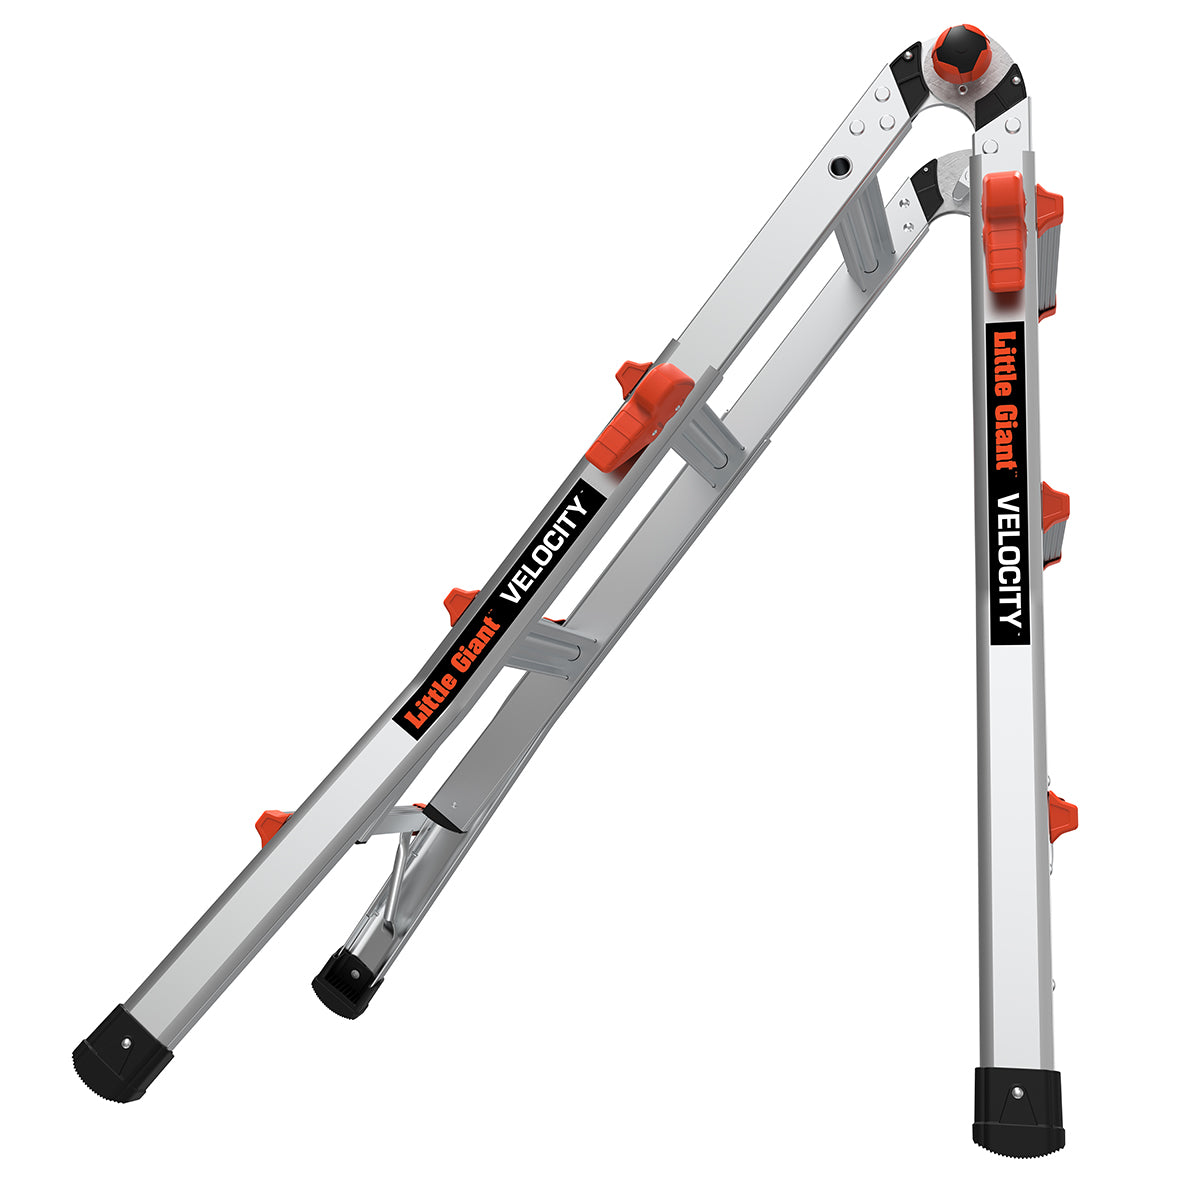 Little Giant 15413-303 - VELOCITY, Model 13 - CSA Grade IA - 300 lb/136 kg Rated, Aluminum Articulated Extendable Ladder